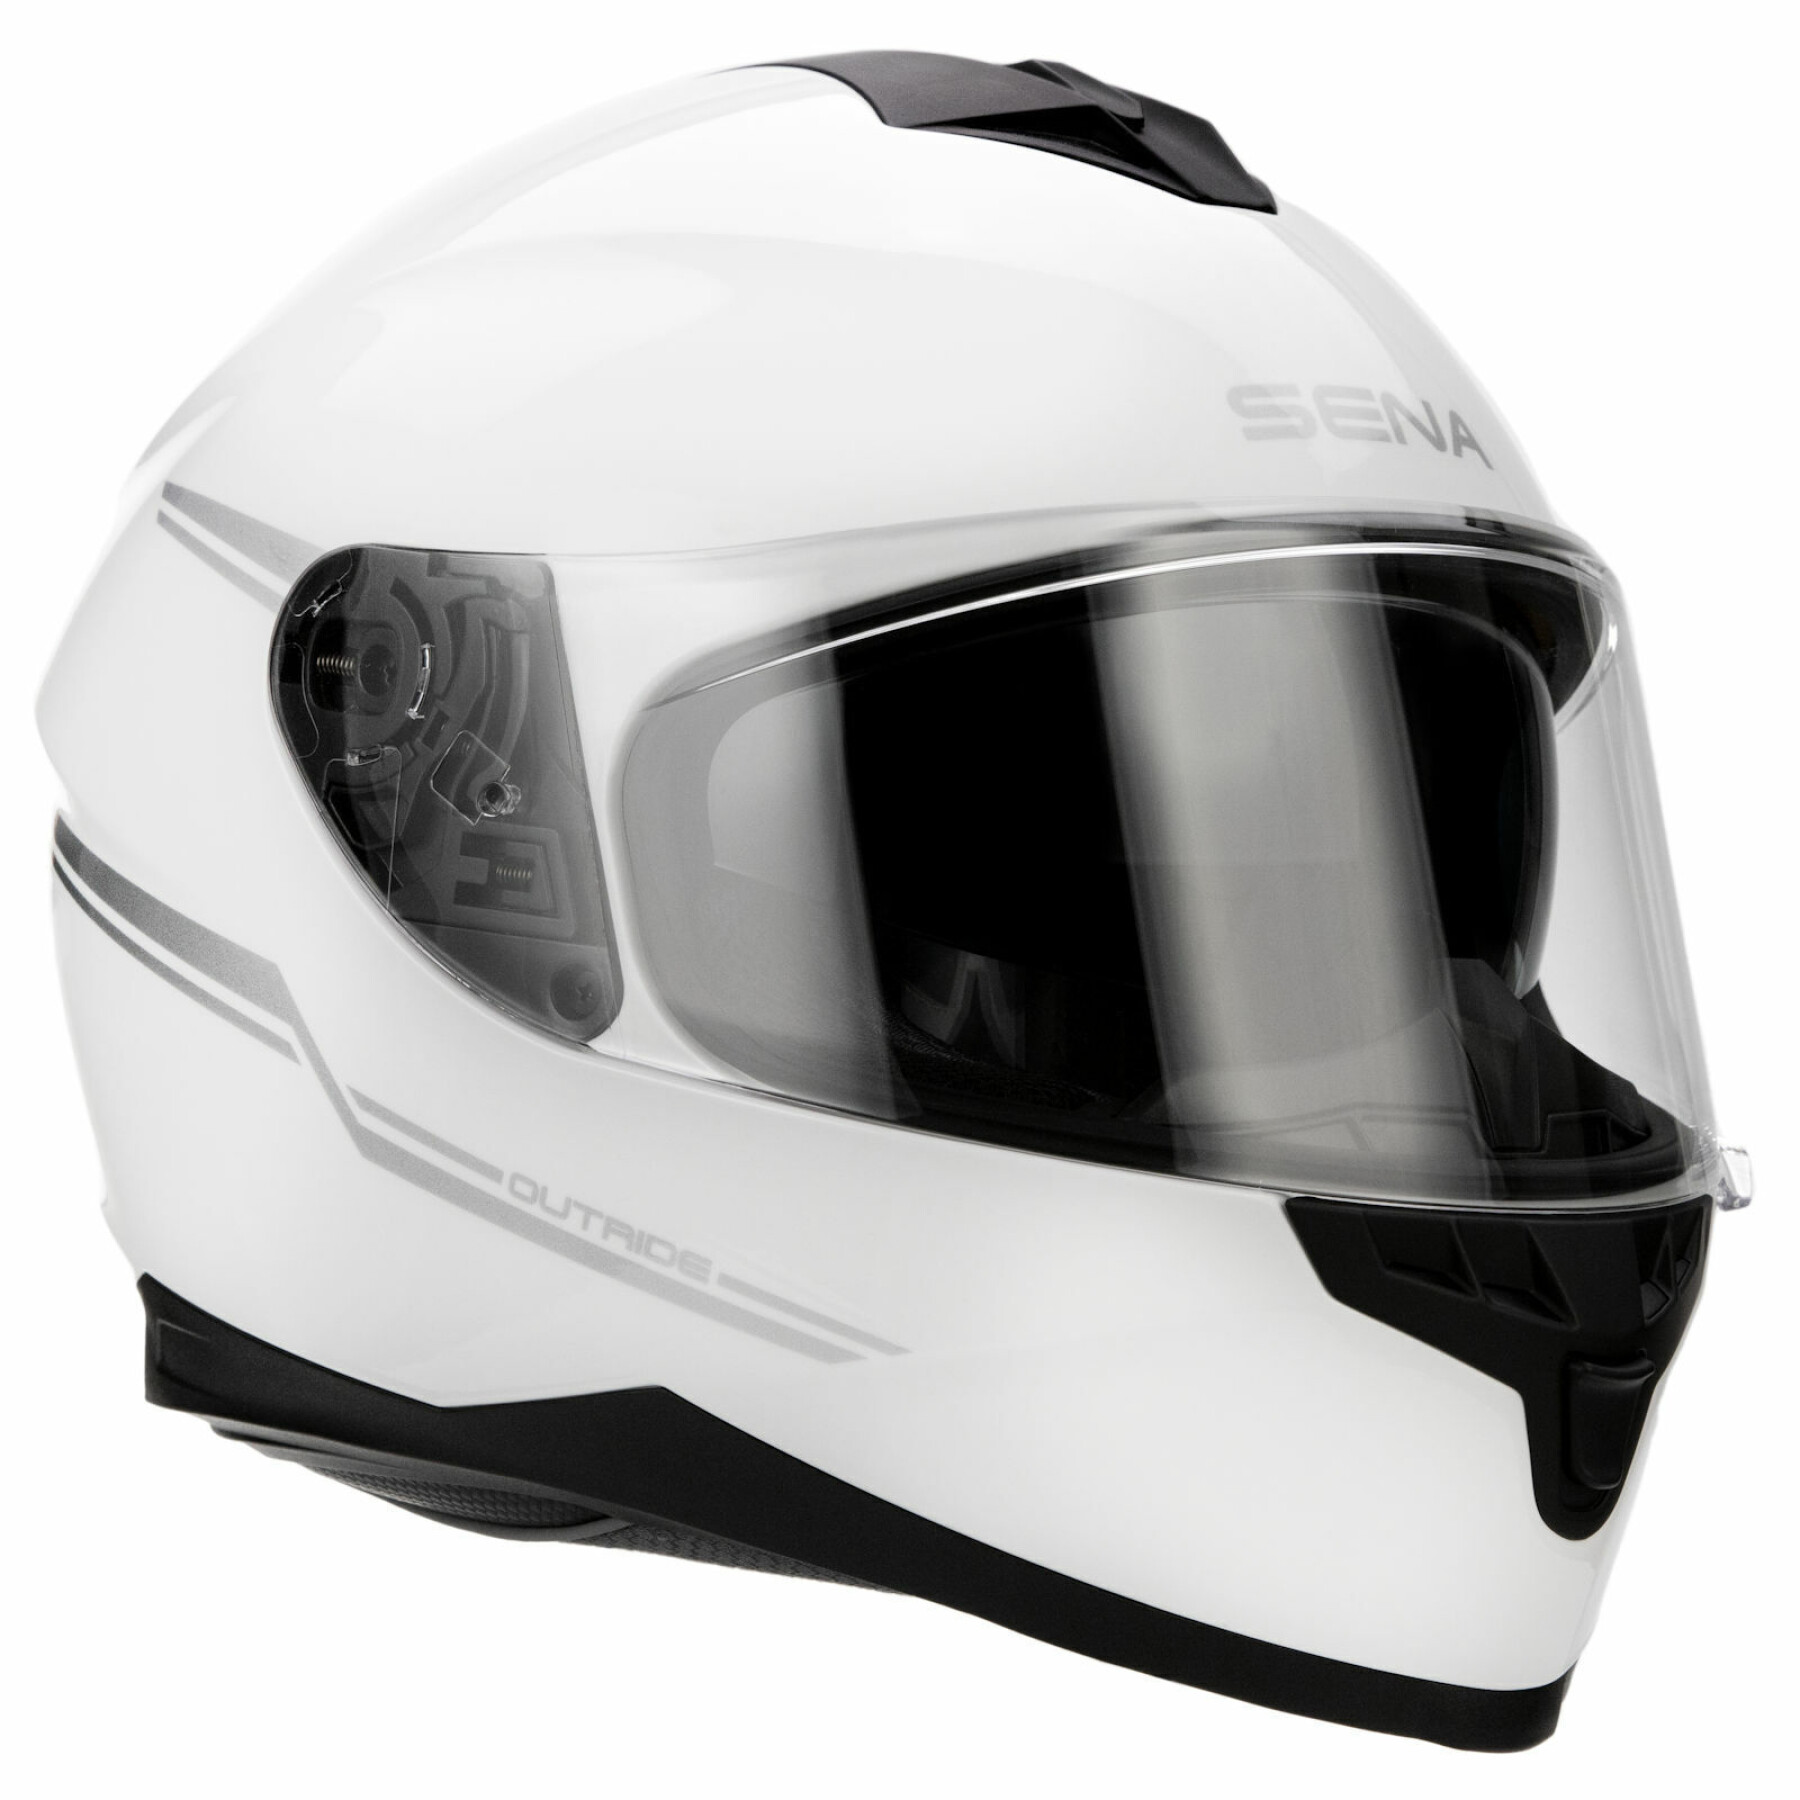 Bluetooth full-face motorcycle helmet Sena Outride